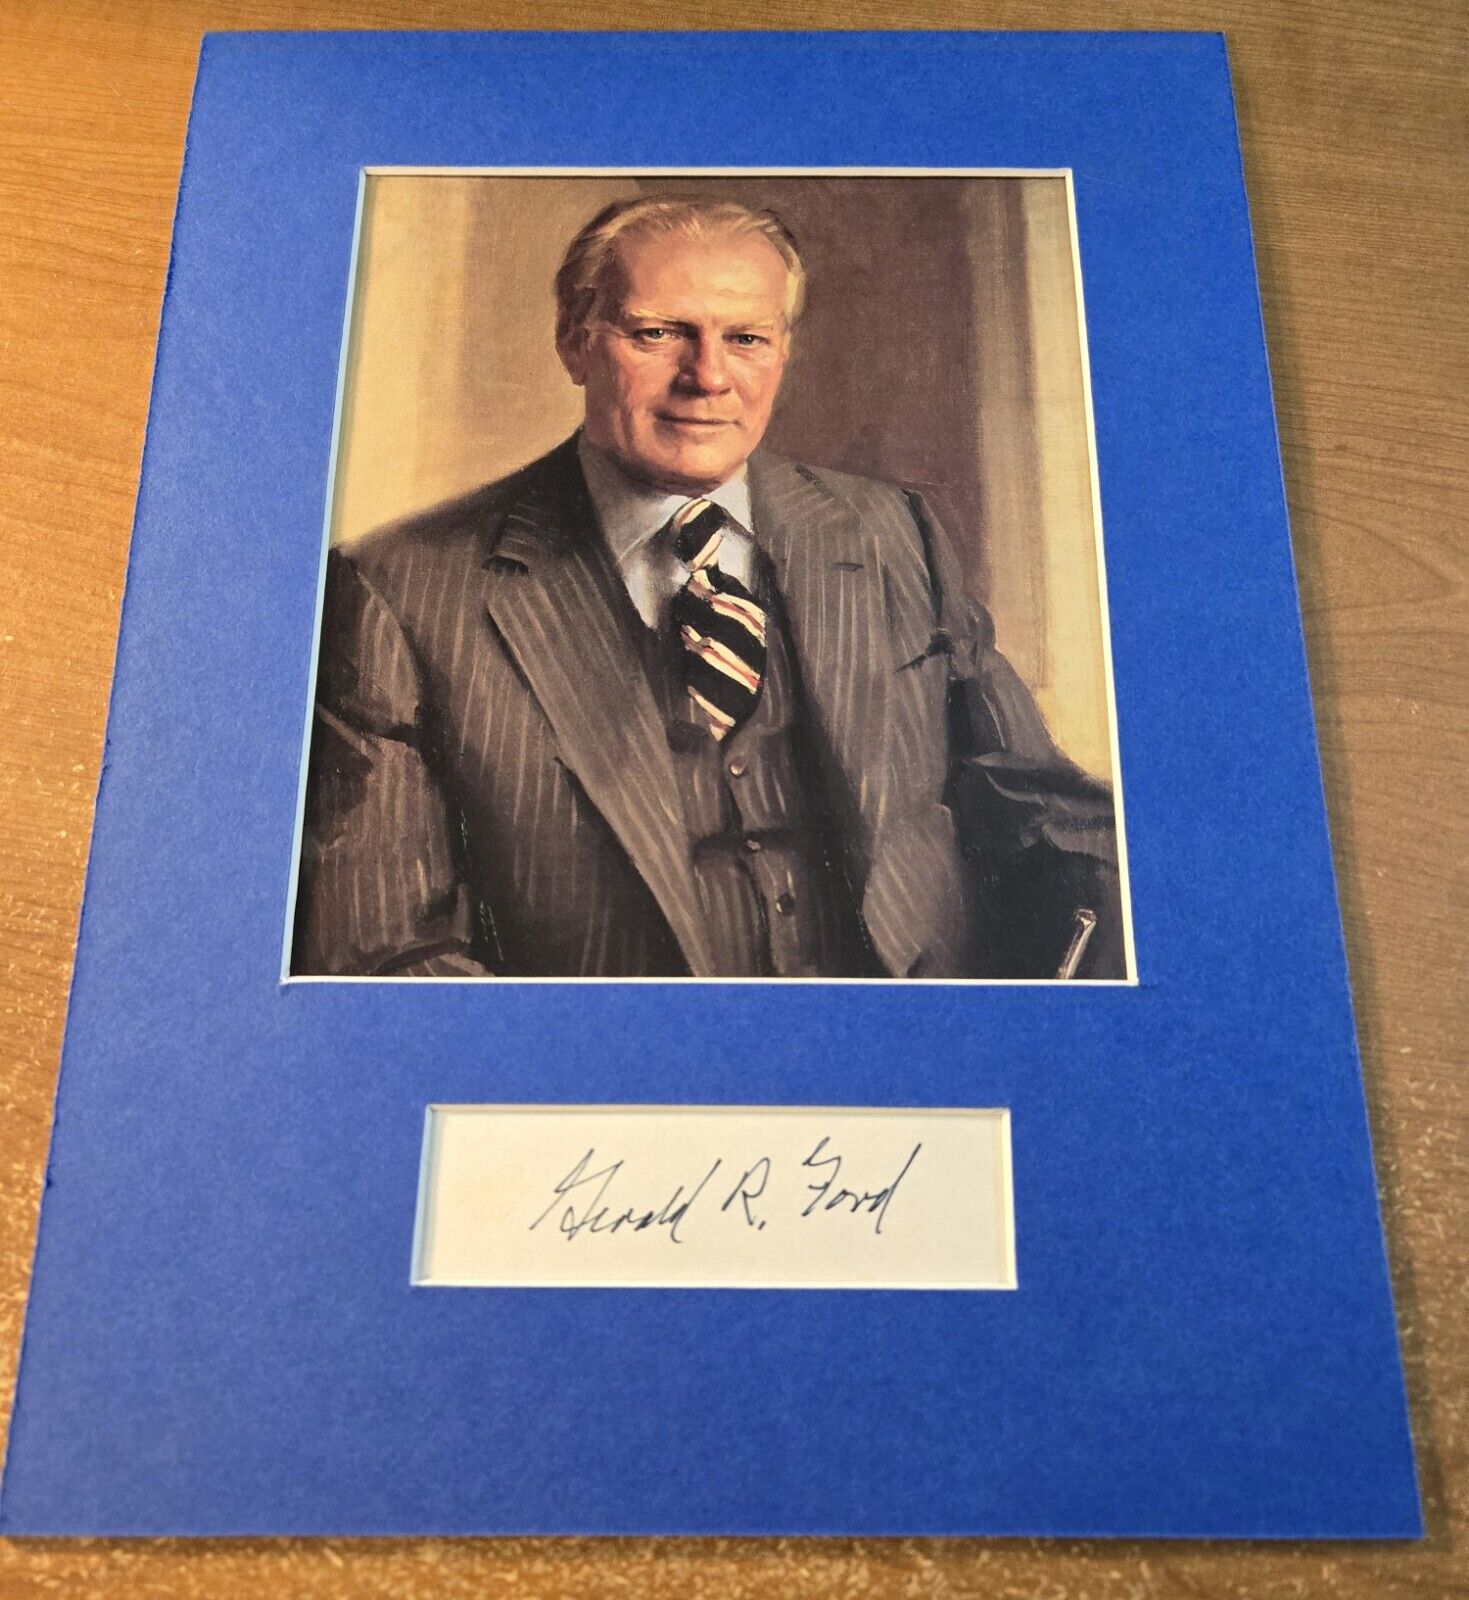  President Gerald R. Ford  Vintage Hand Signed Autograph - Matted w/ Color Photo